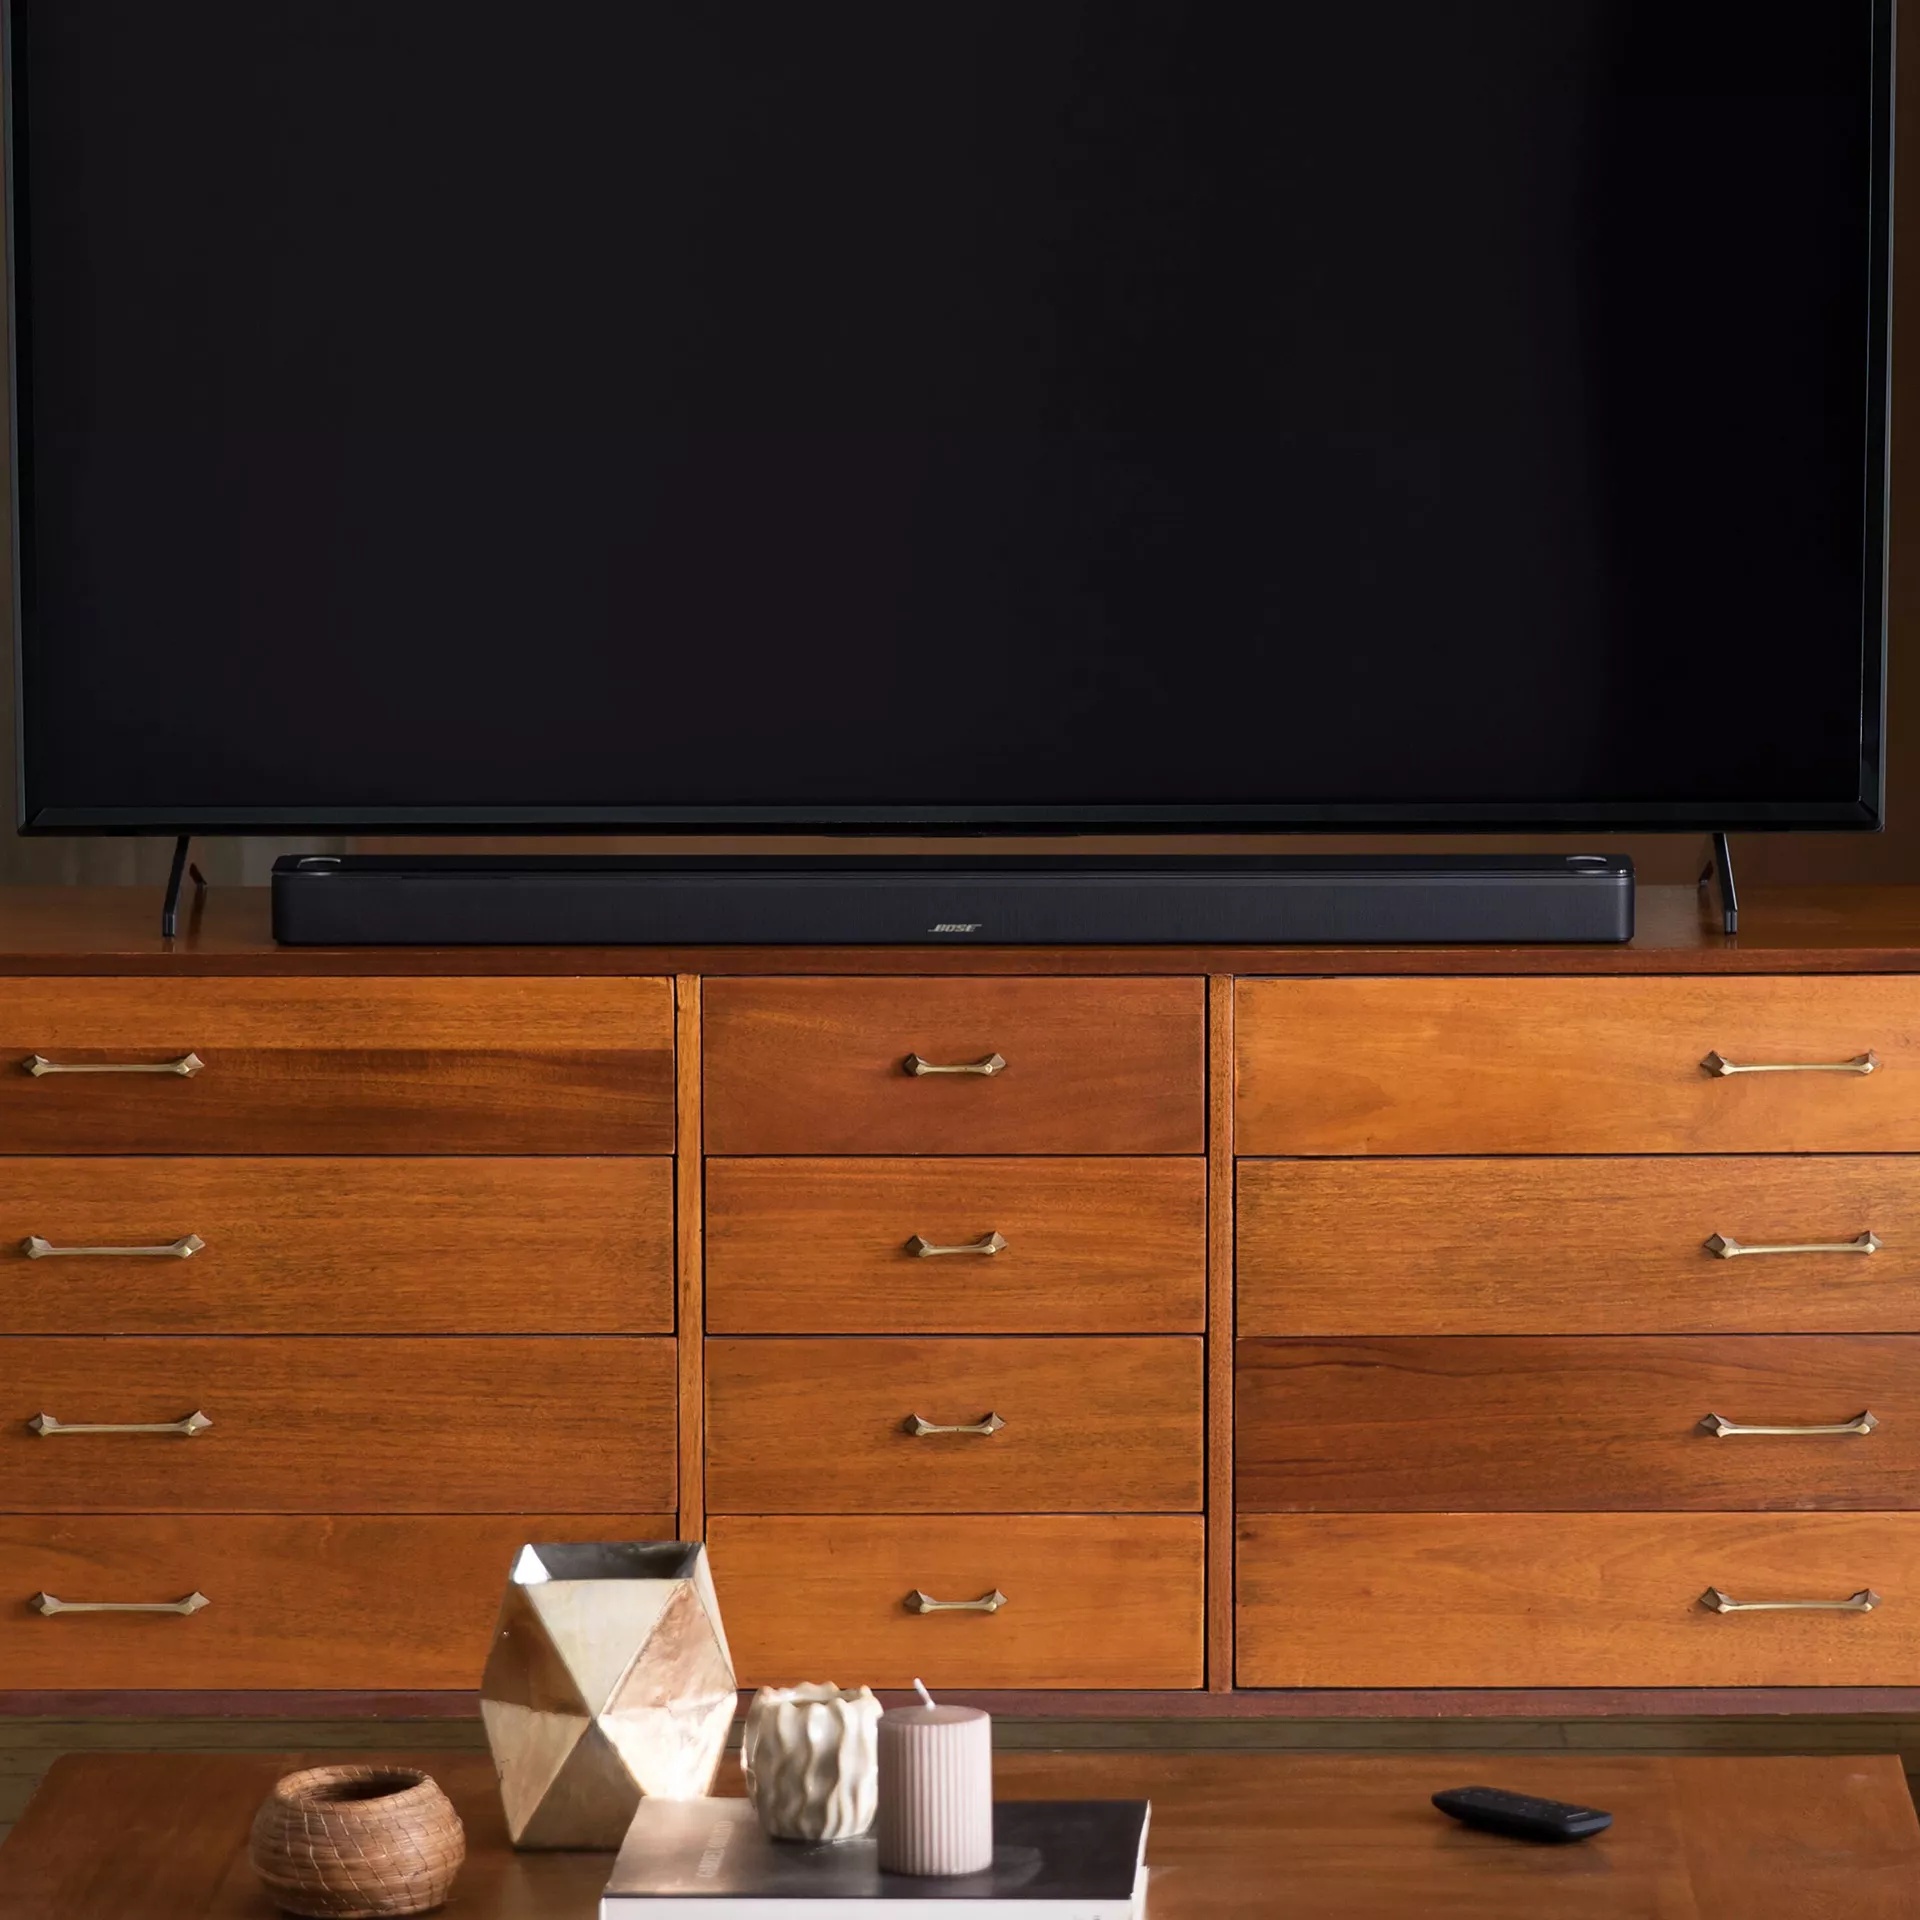 Bose Smart Ultra Soundbar connected to a flat-screen TV on a media console